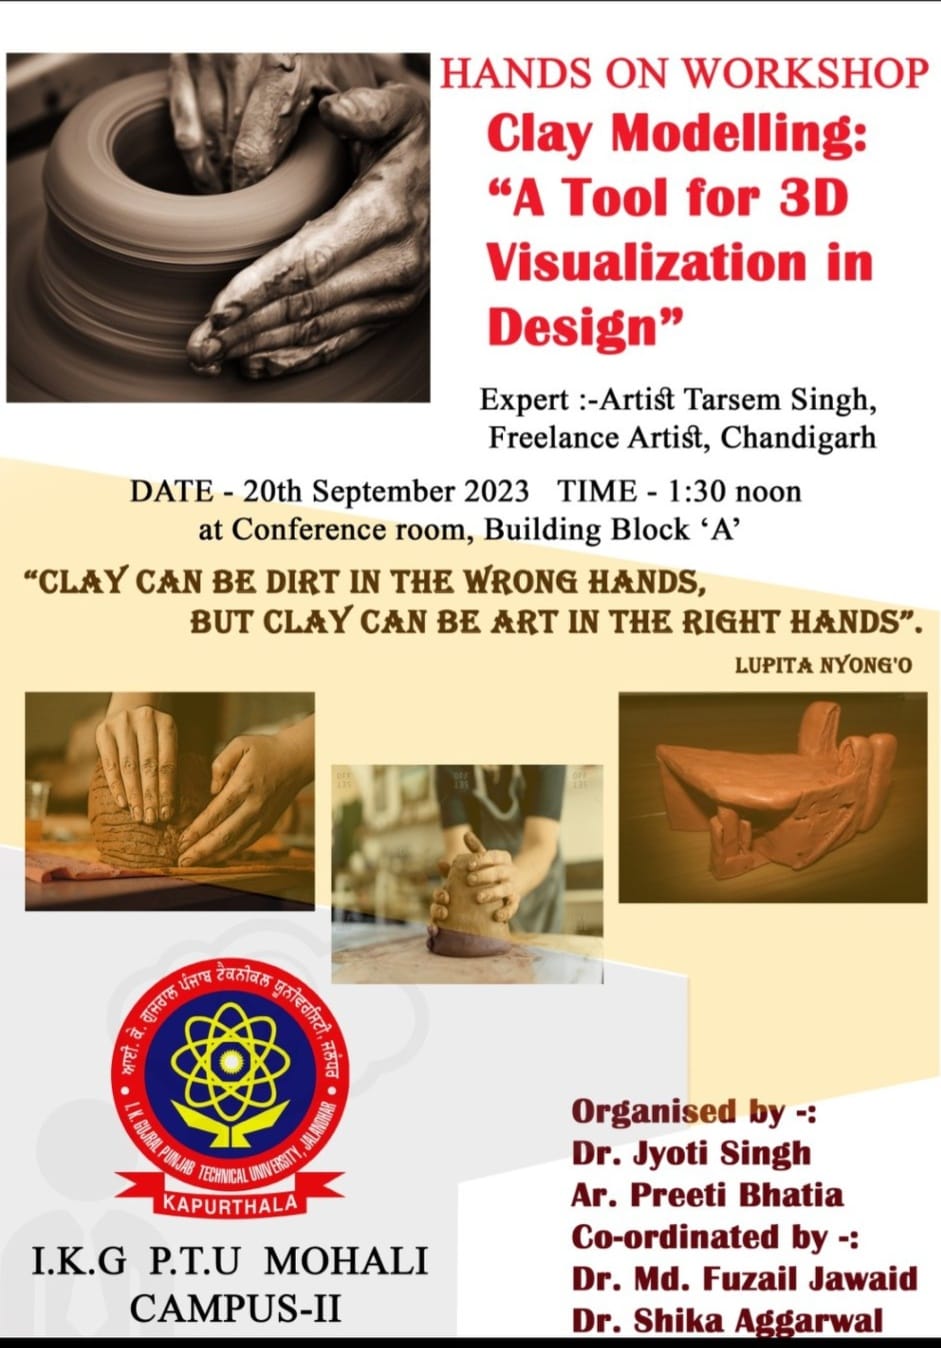 One Day Hands-on Workshop on Clay Modelling: A Tool For 3D Visualization In Design